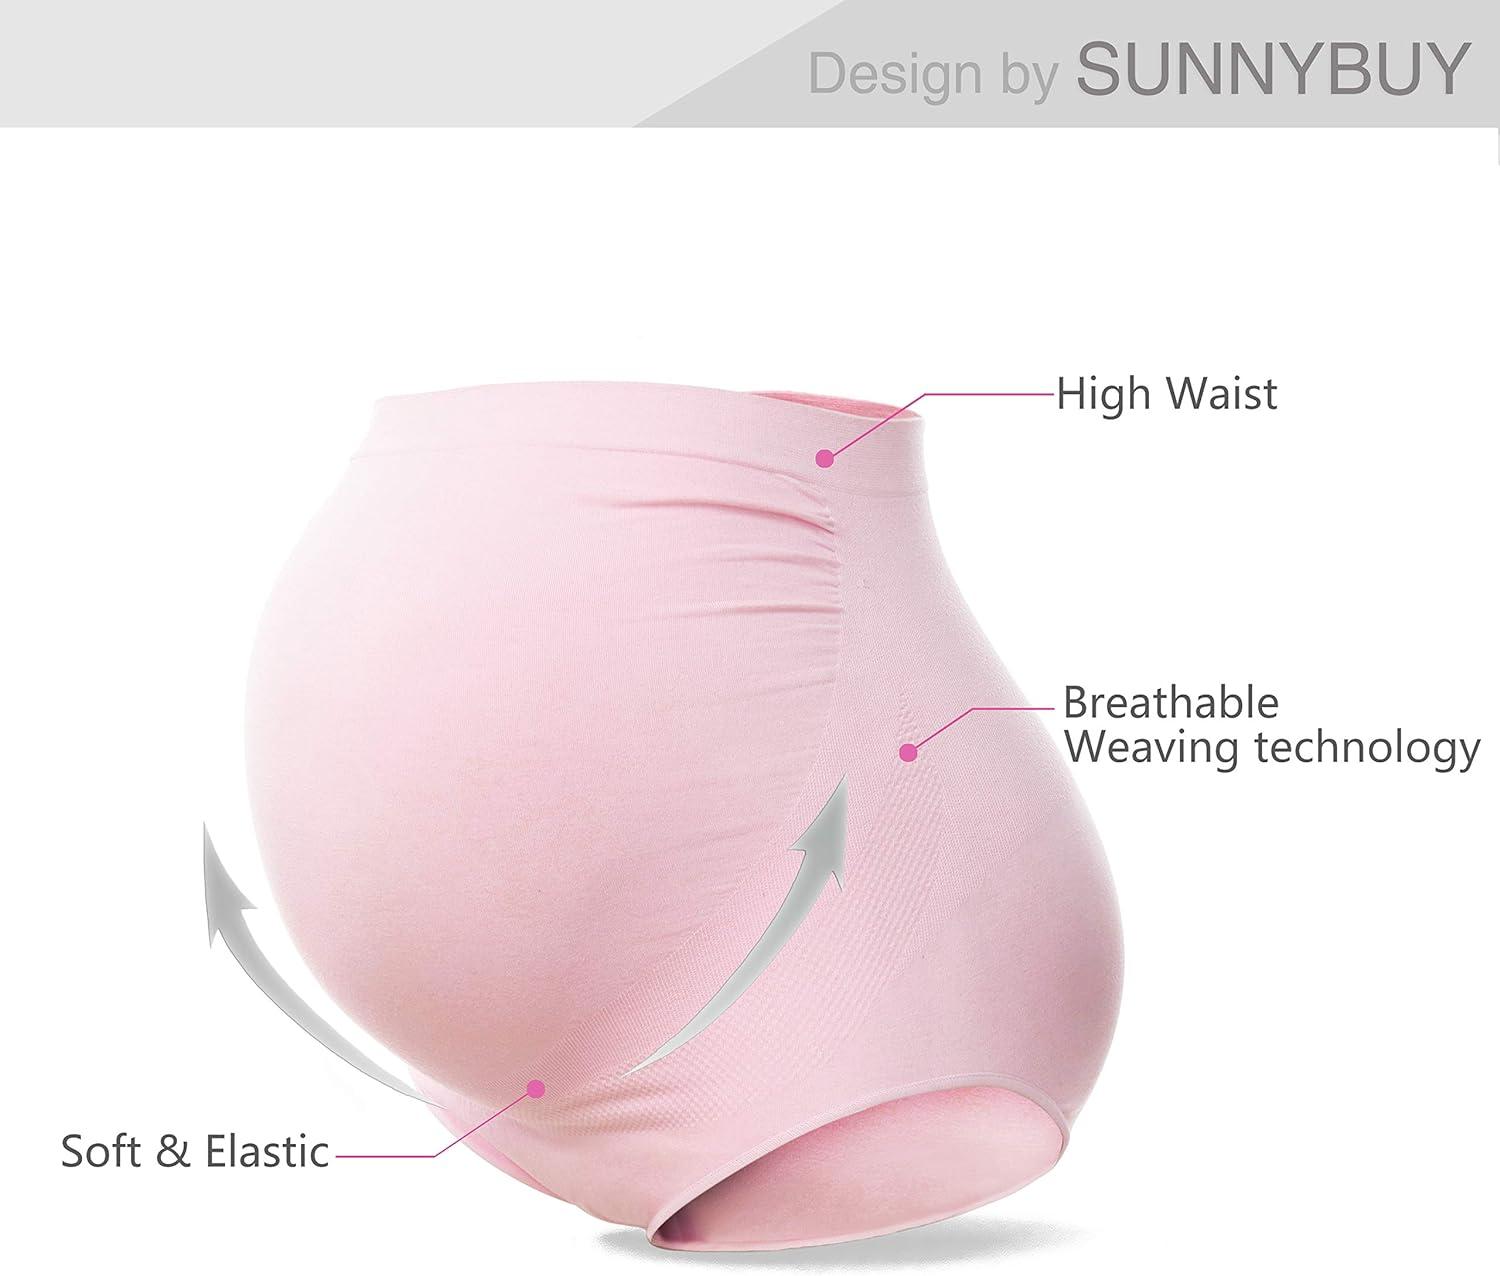  SUNNYBUY Maternity Underwear Under Bump & Over Bump  Pregnancy Panties Sets Seamless Womens Maternity Clothes Packs